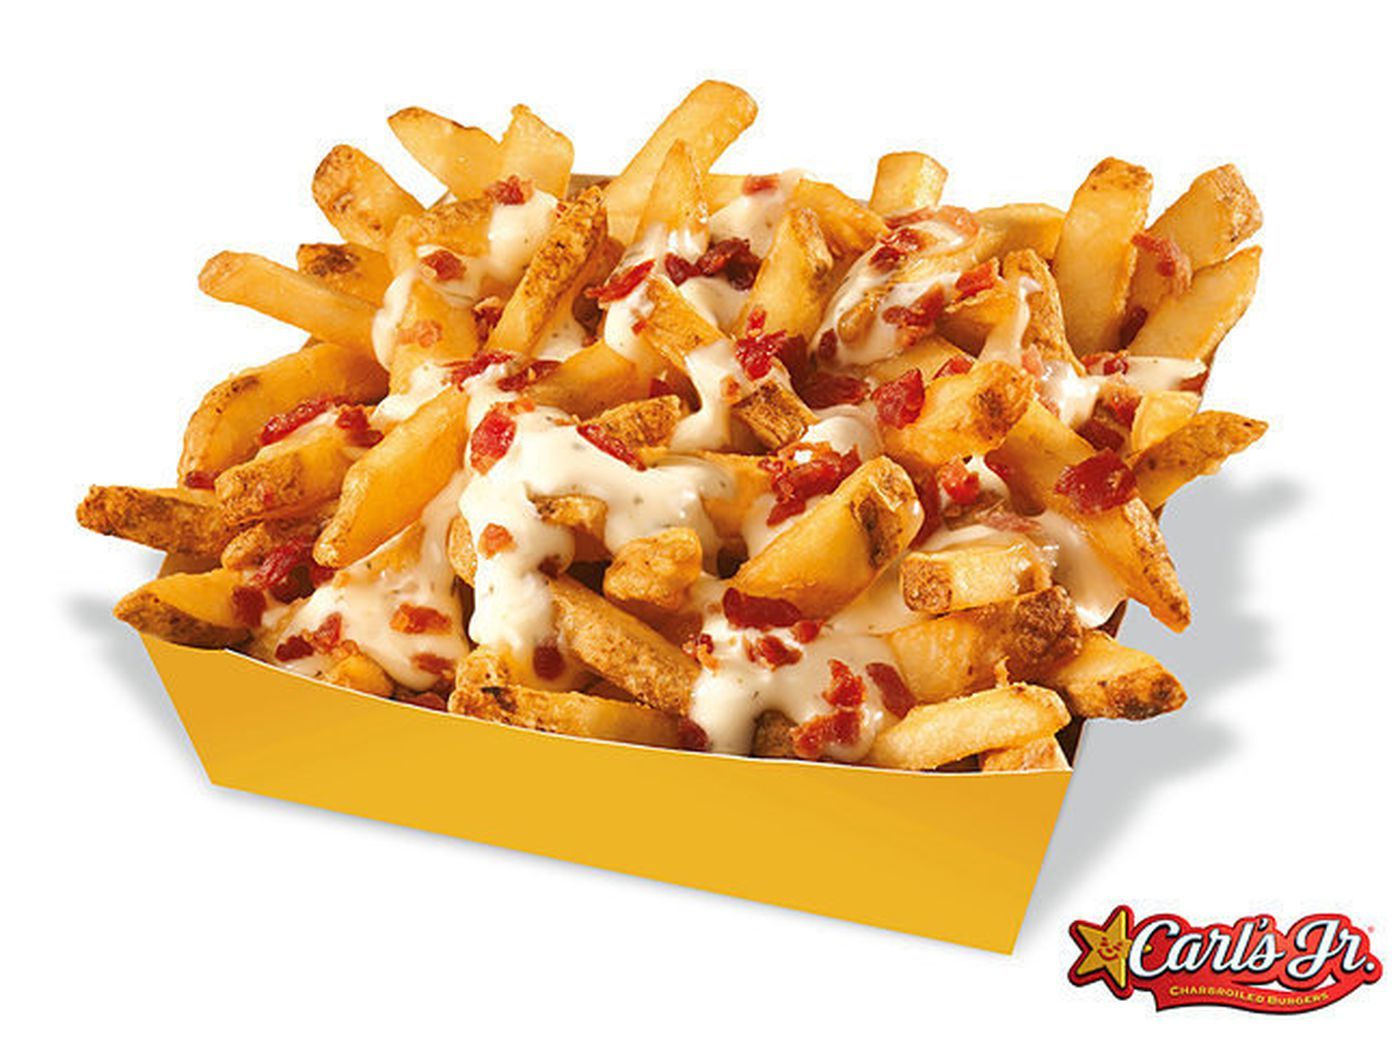 Carl's Jr. Bacon Ranch Fries Is Essentially American Poutine